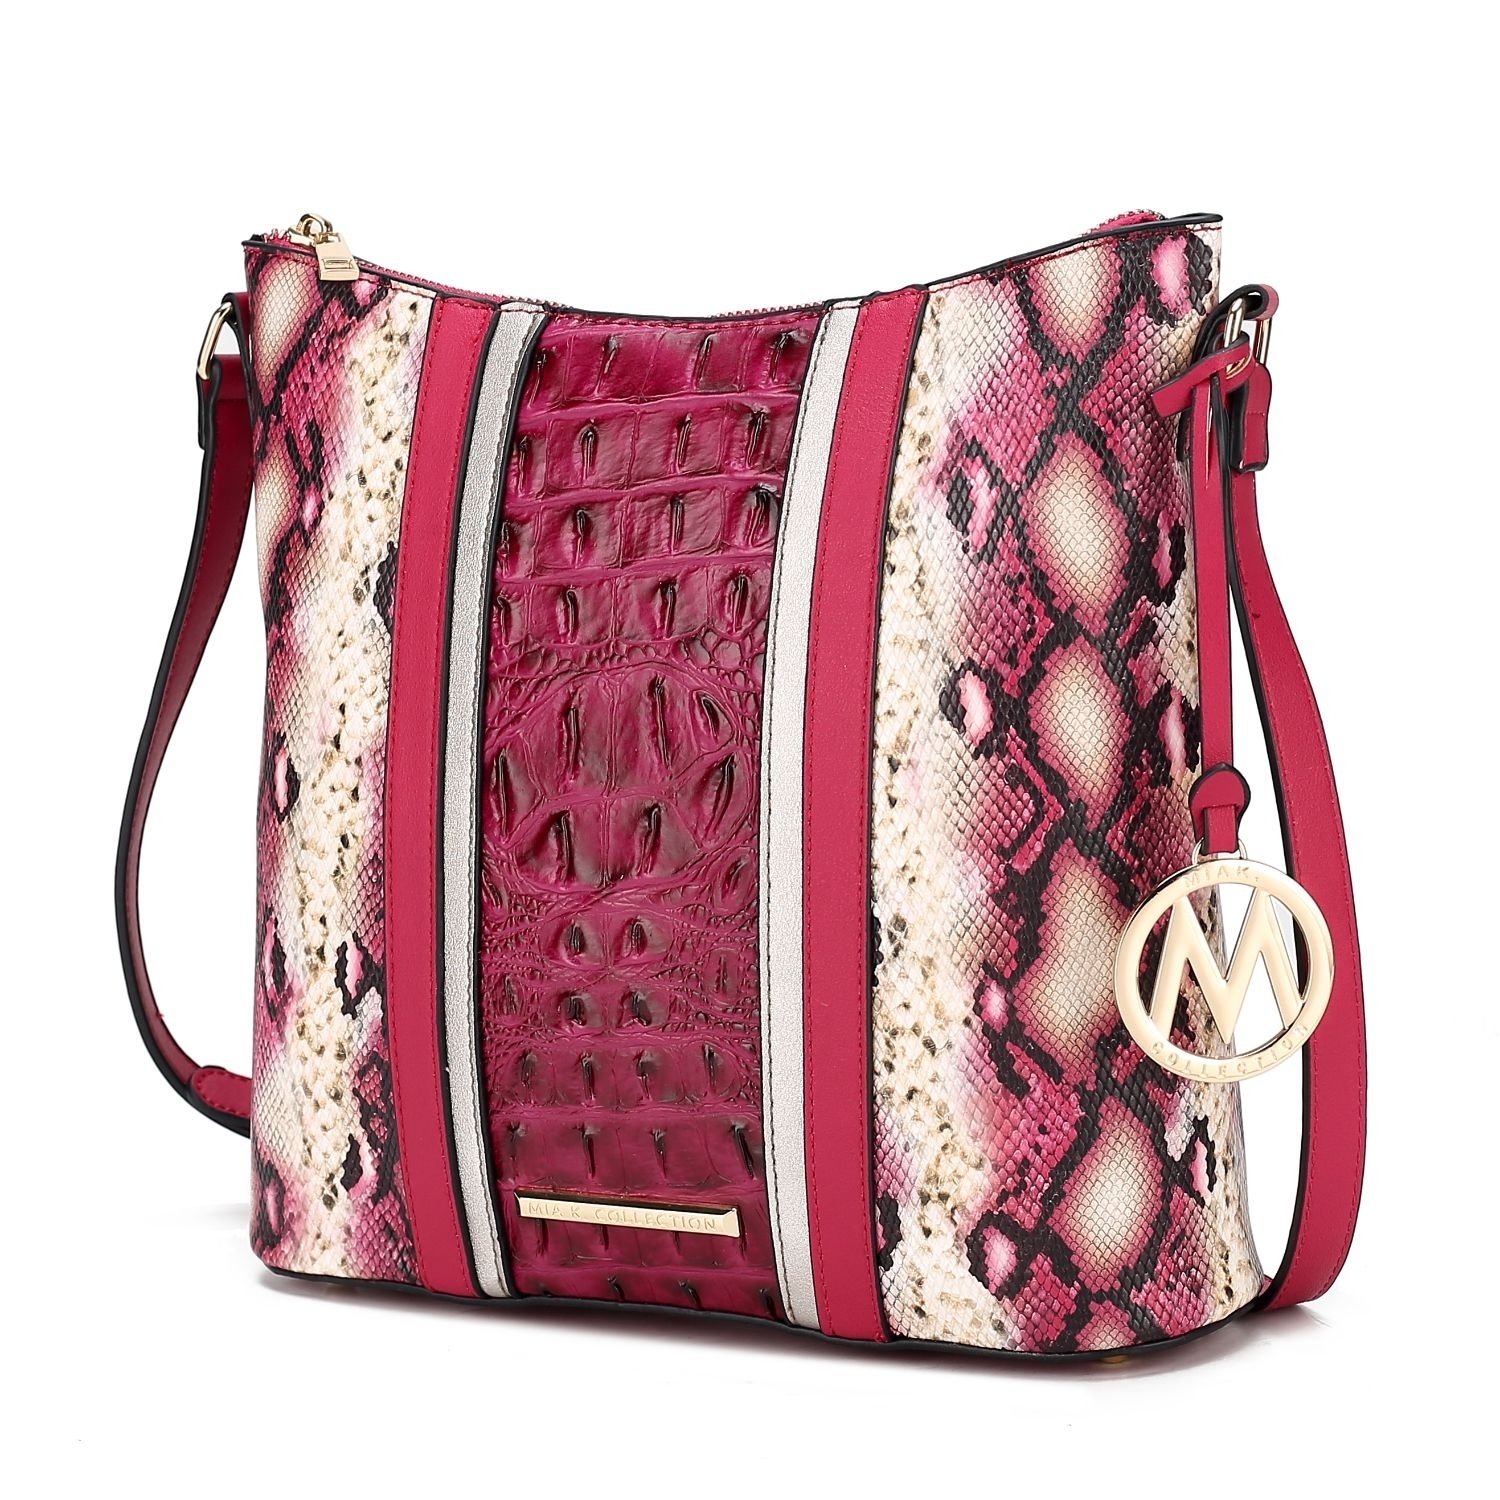 MKF Collection Meline Faux Crocodile And Snake Embossed Vegan Leather Women's Shoulder Bag By Mia K - Fuchsia